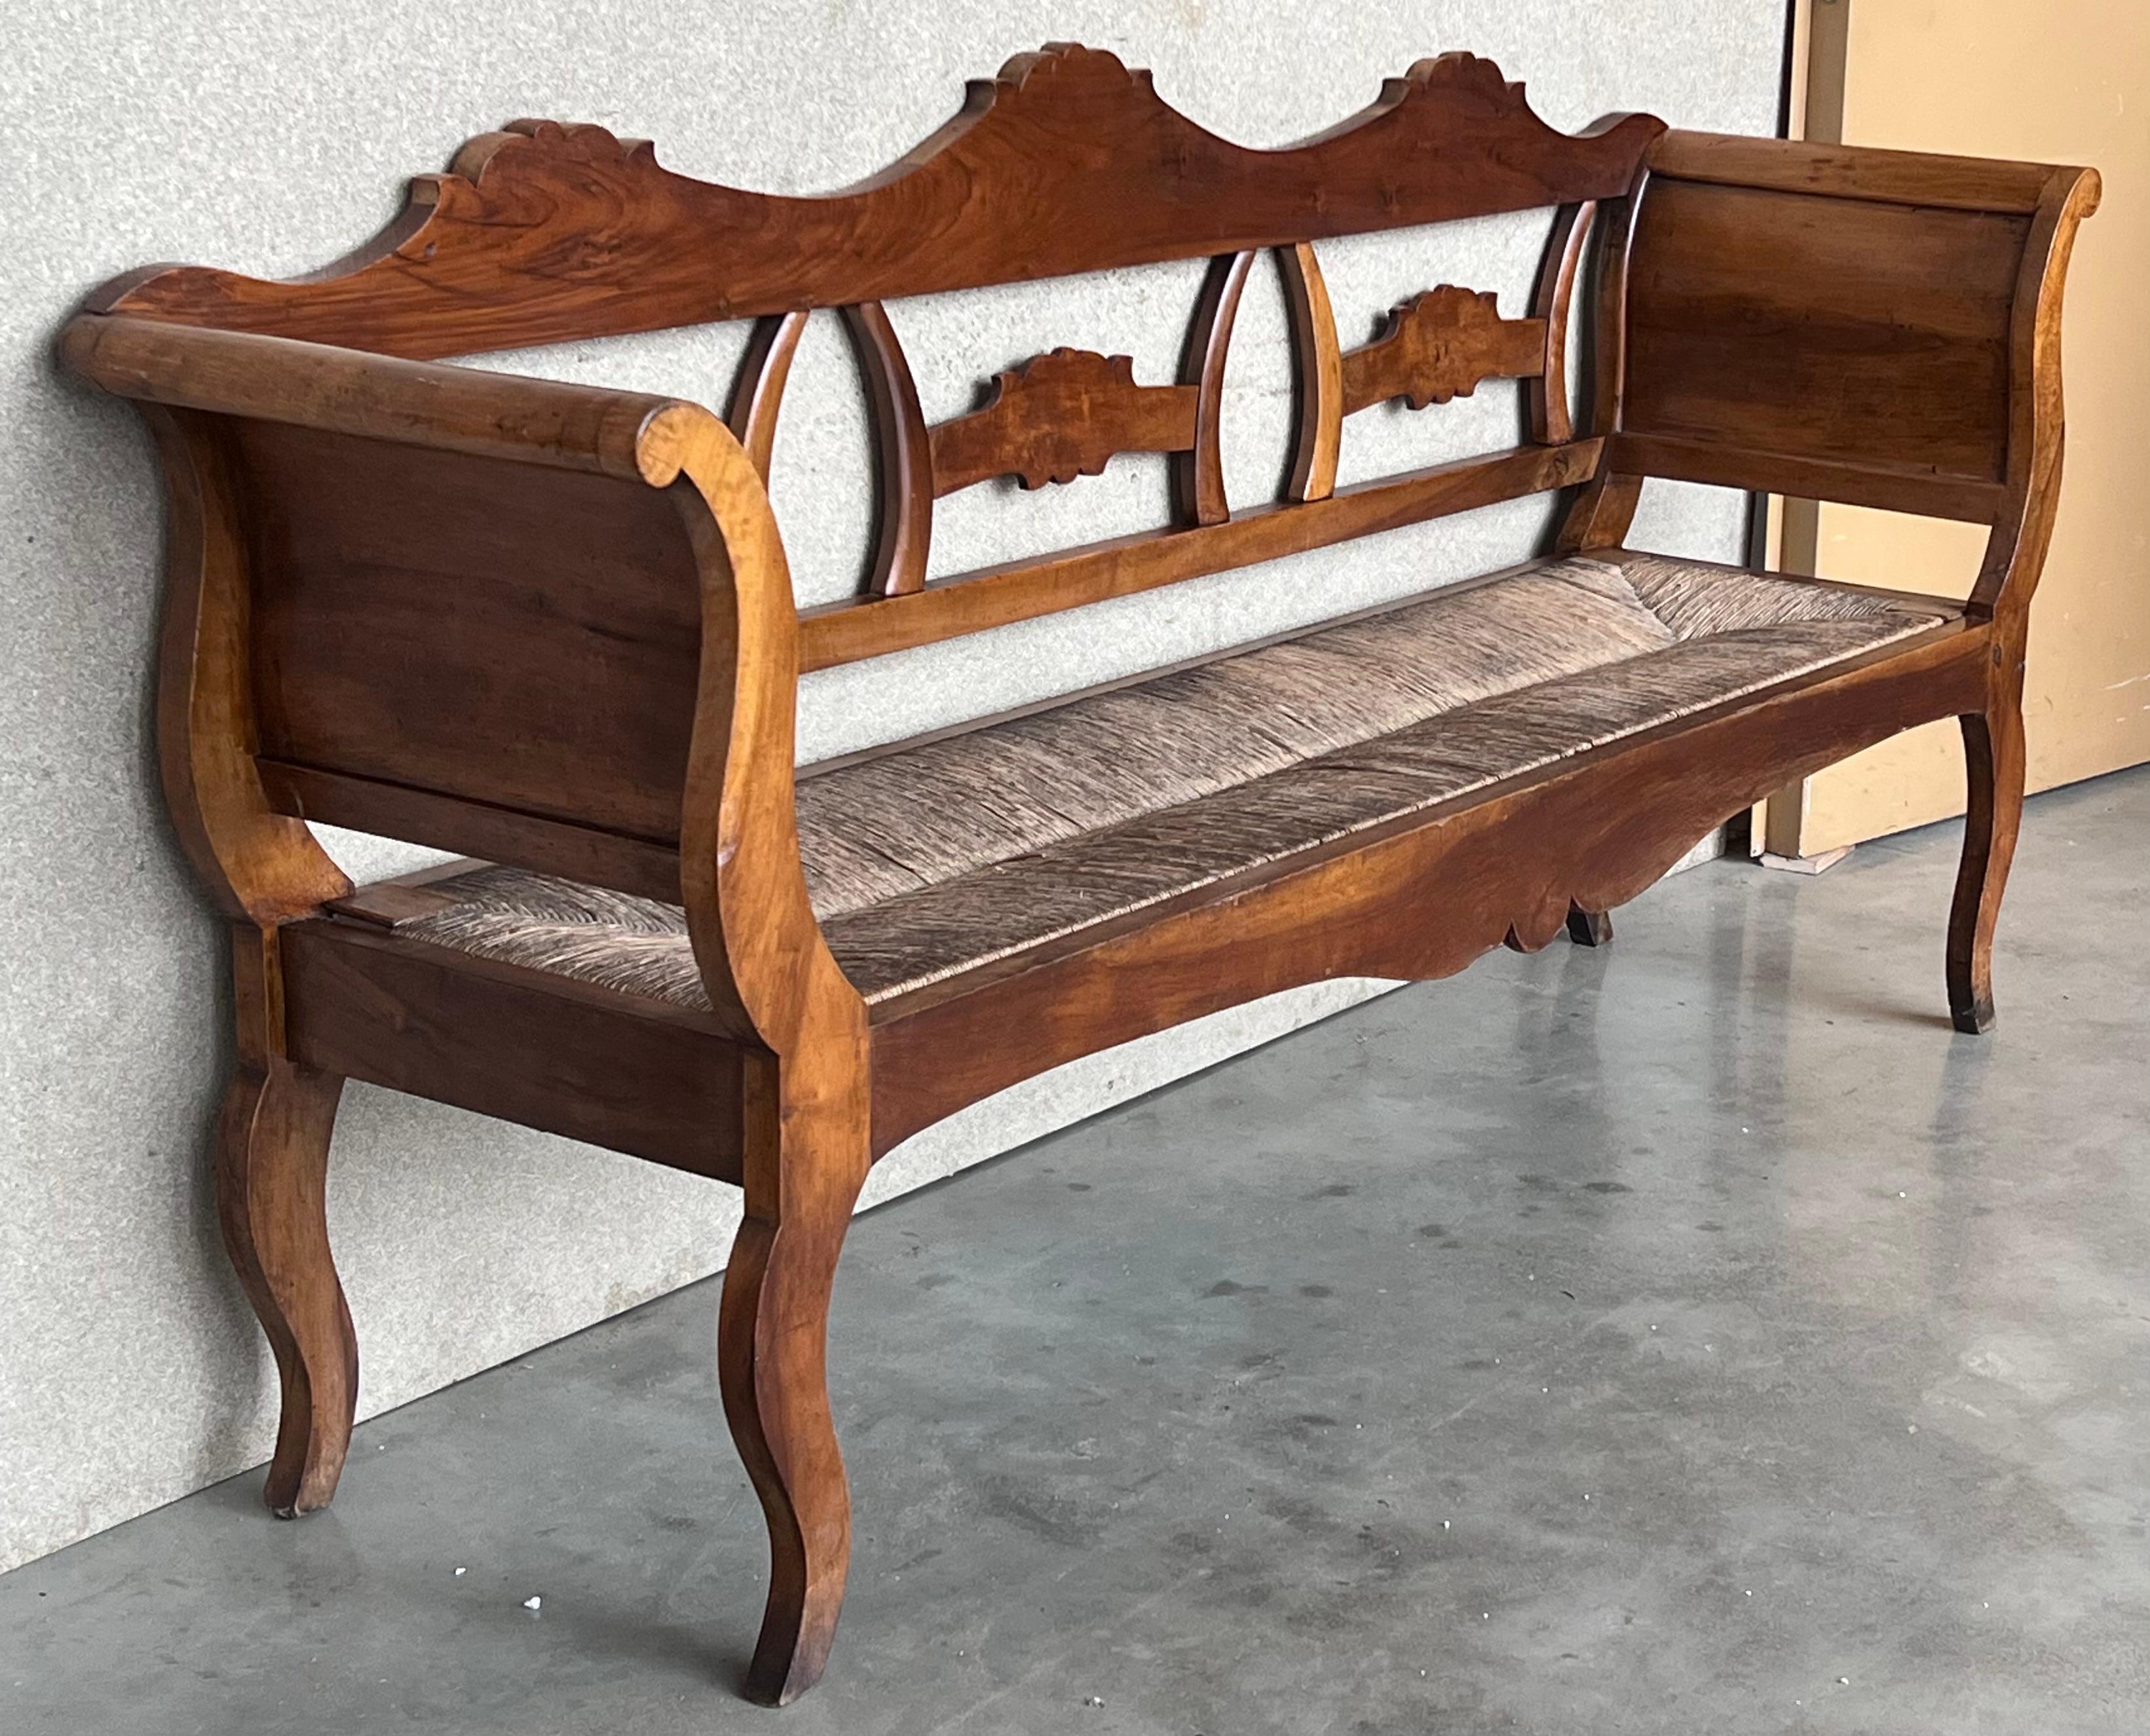 20th Century Catalan Bench in Walnut with Caned Seat For Sale 1